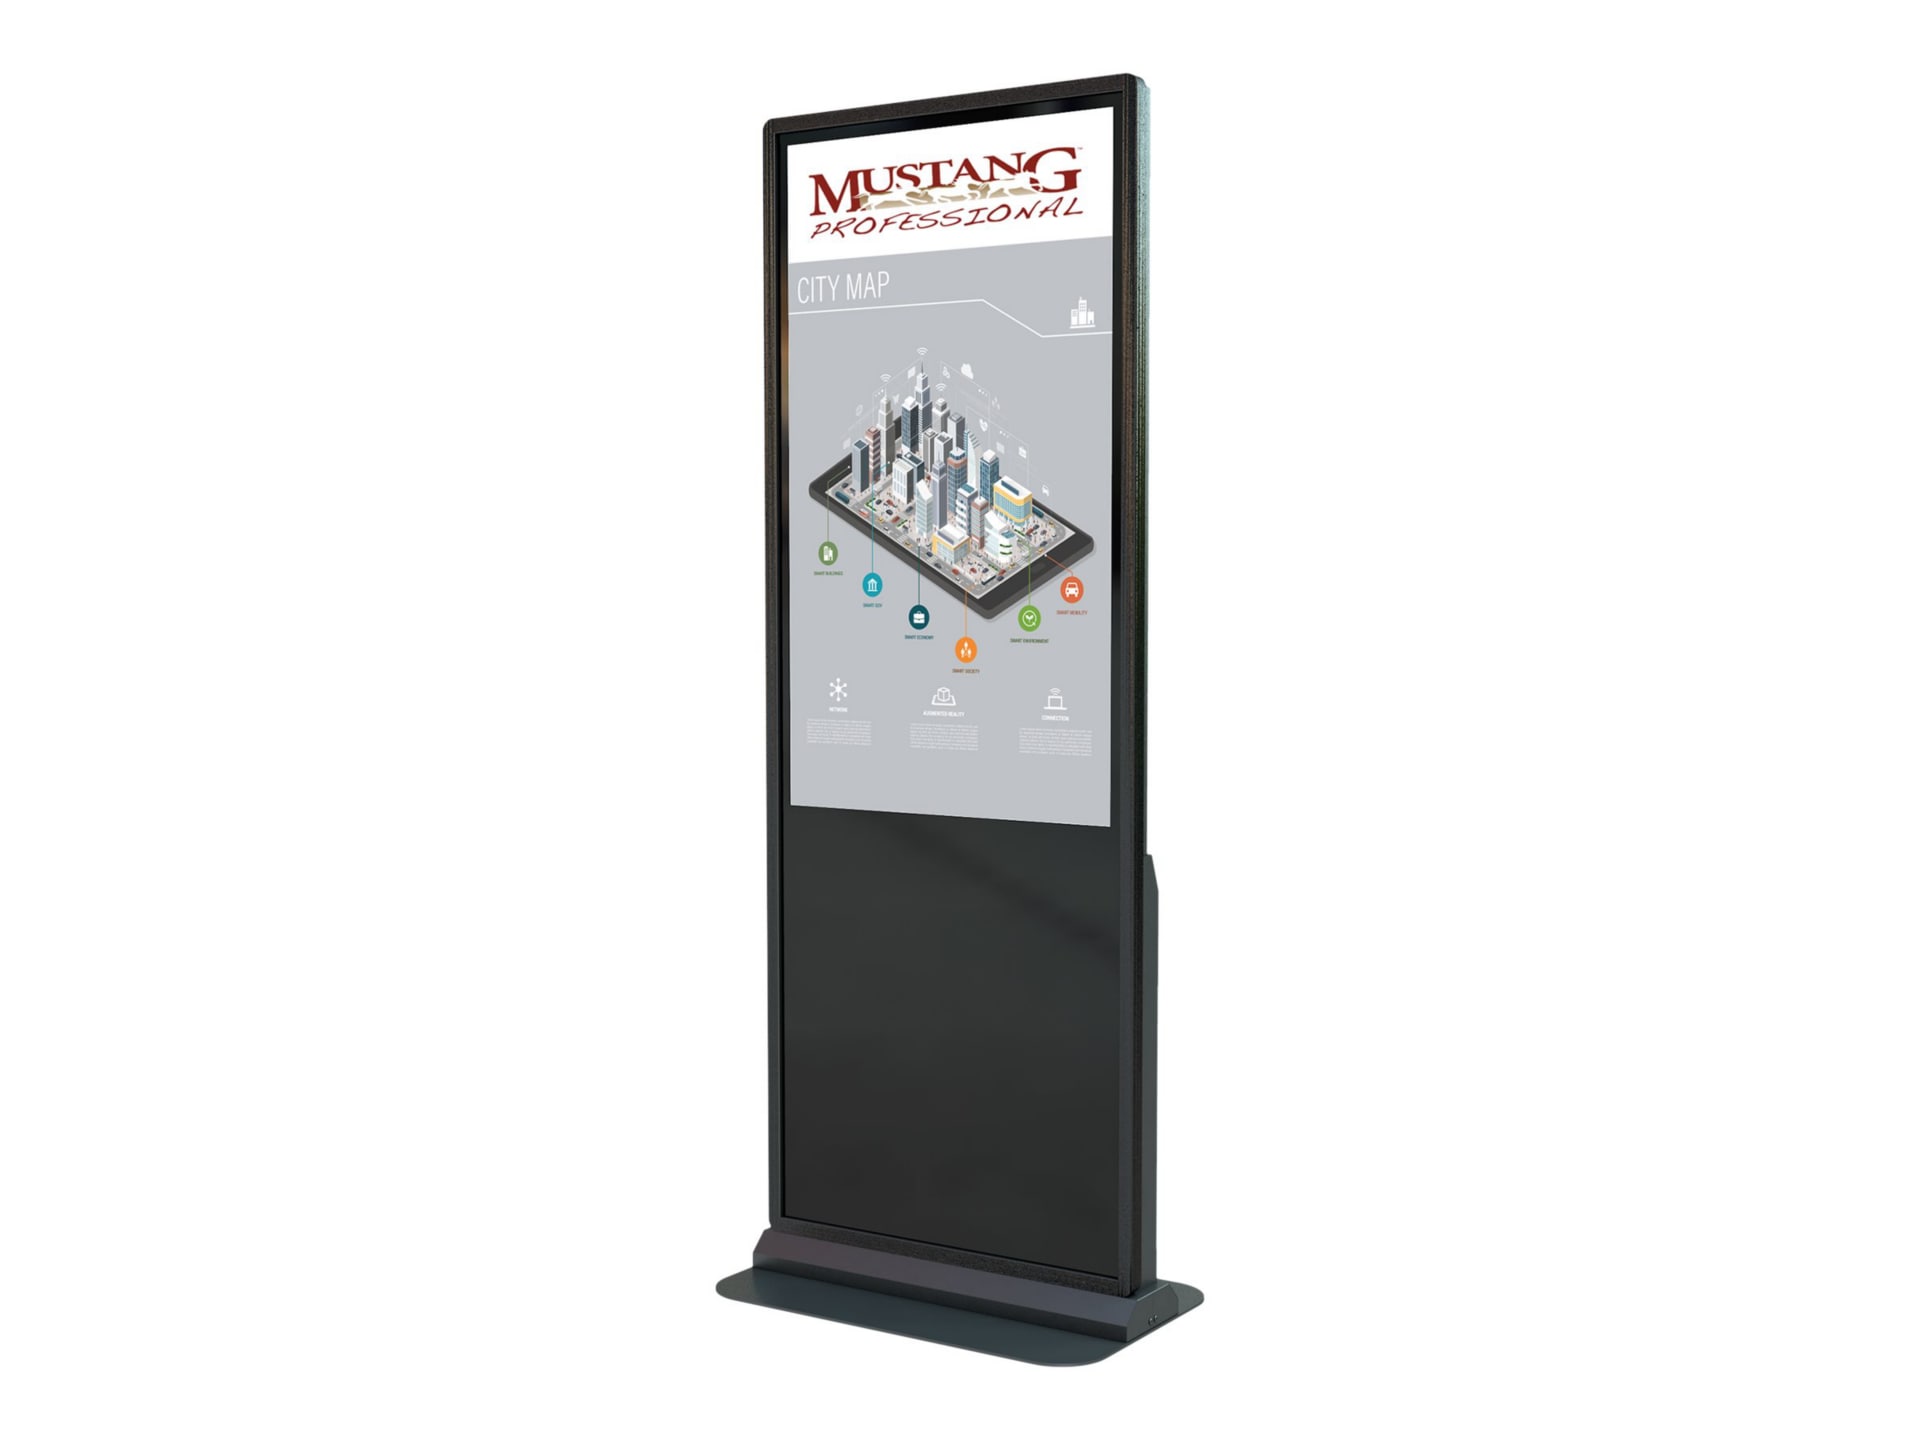 Mustang Professional Kiosk MPKDI-KFP249A with Android media player 49" Class (48.5" viewable) LED-backlit LCD display -